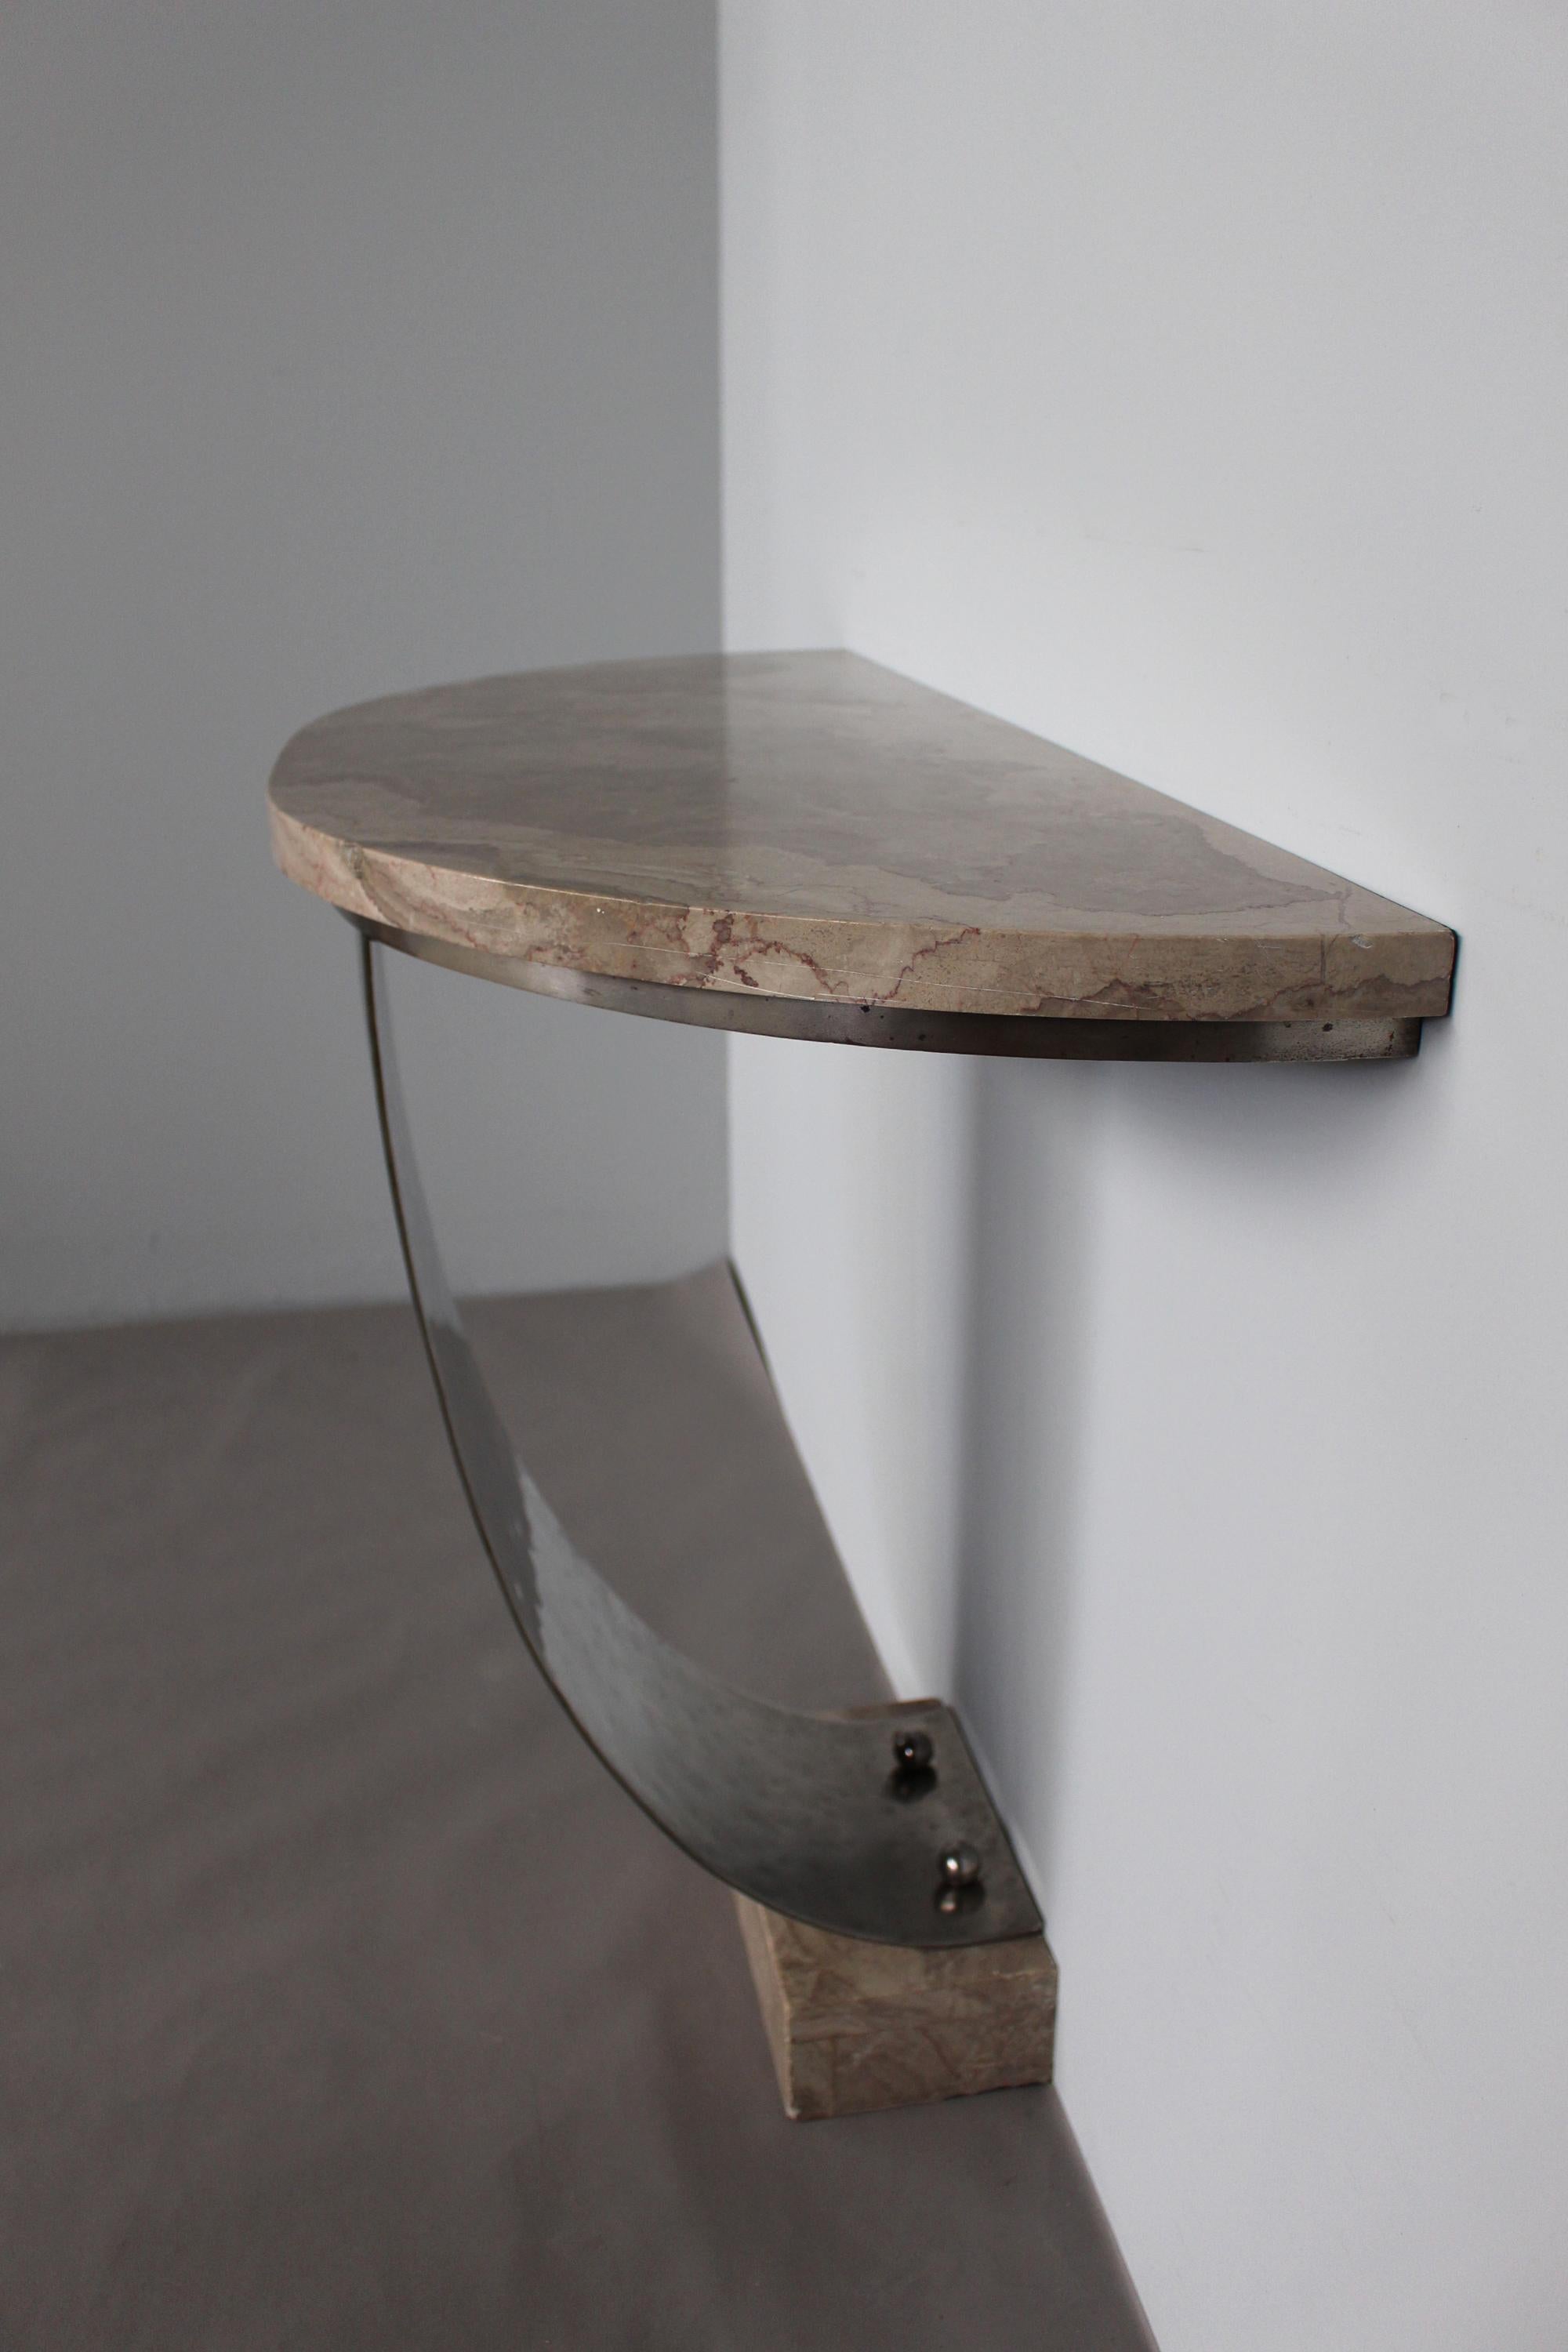 A Fine French Art Deco Hammered Metal and Marble Console Table  In Good Condition For Sale In Long Island City, NY